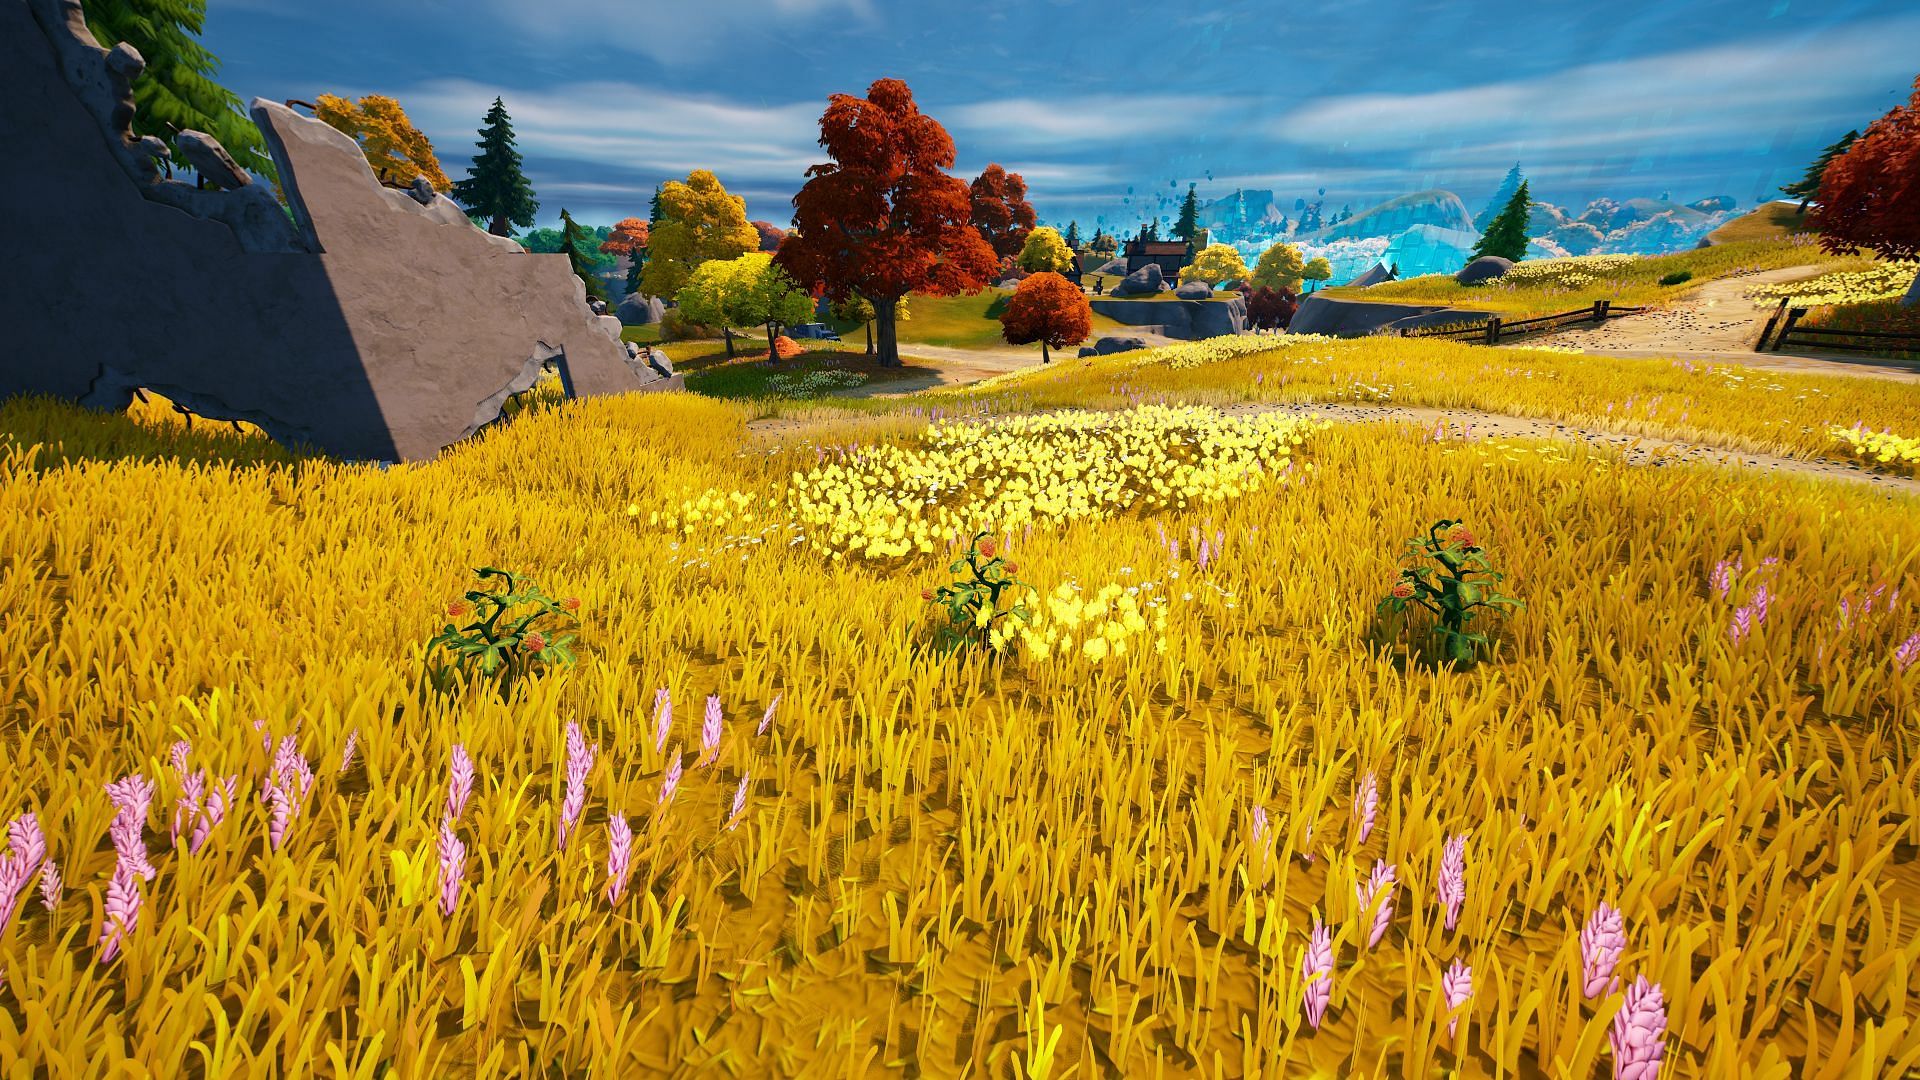 Land in the Medieval biome, aka the biome with the orange/red trees (Image via Epic Games/Fortnite)